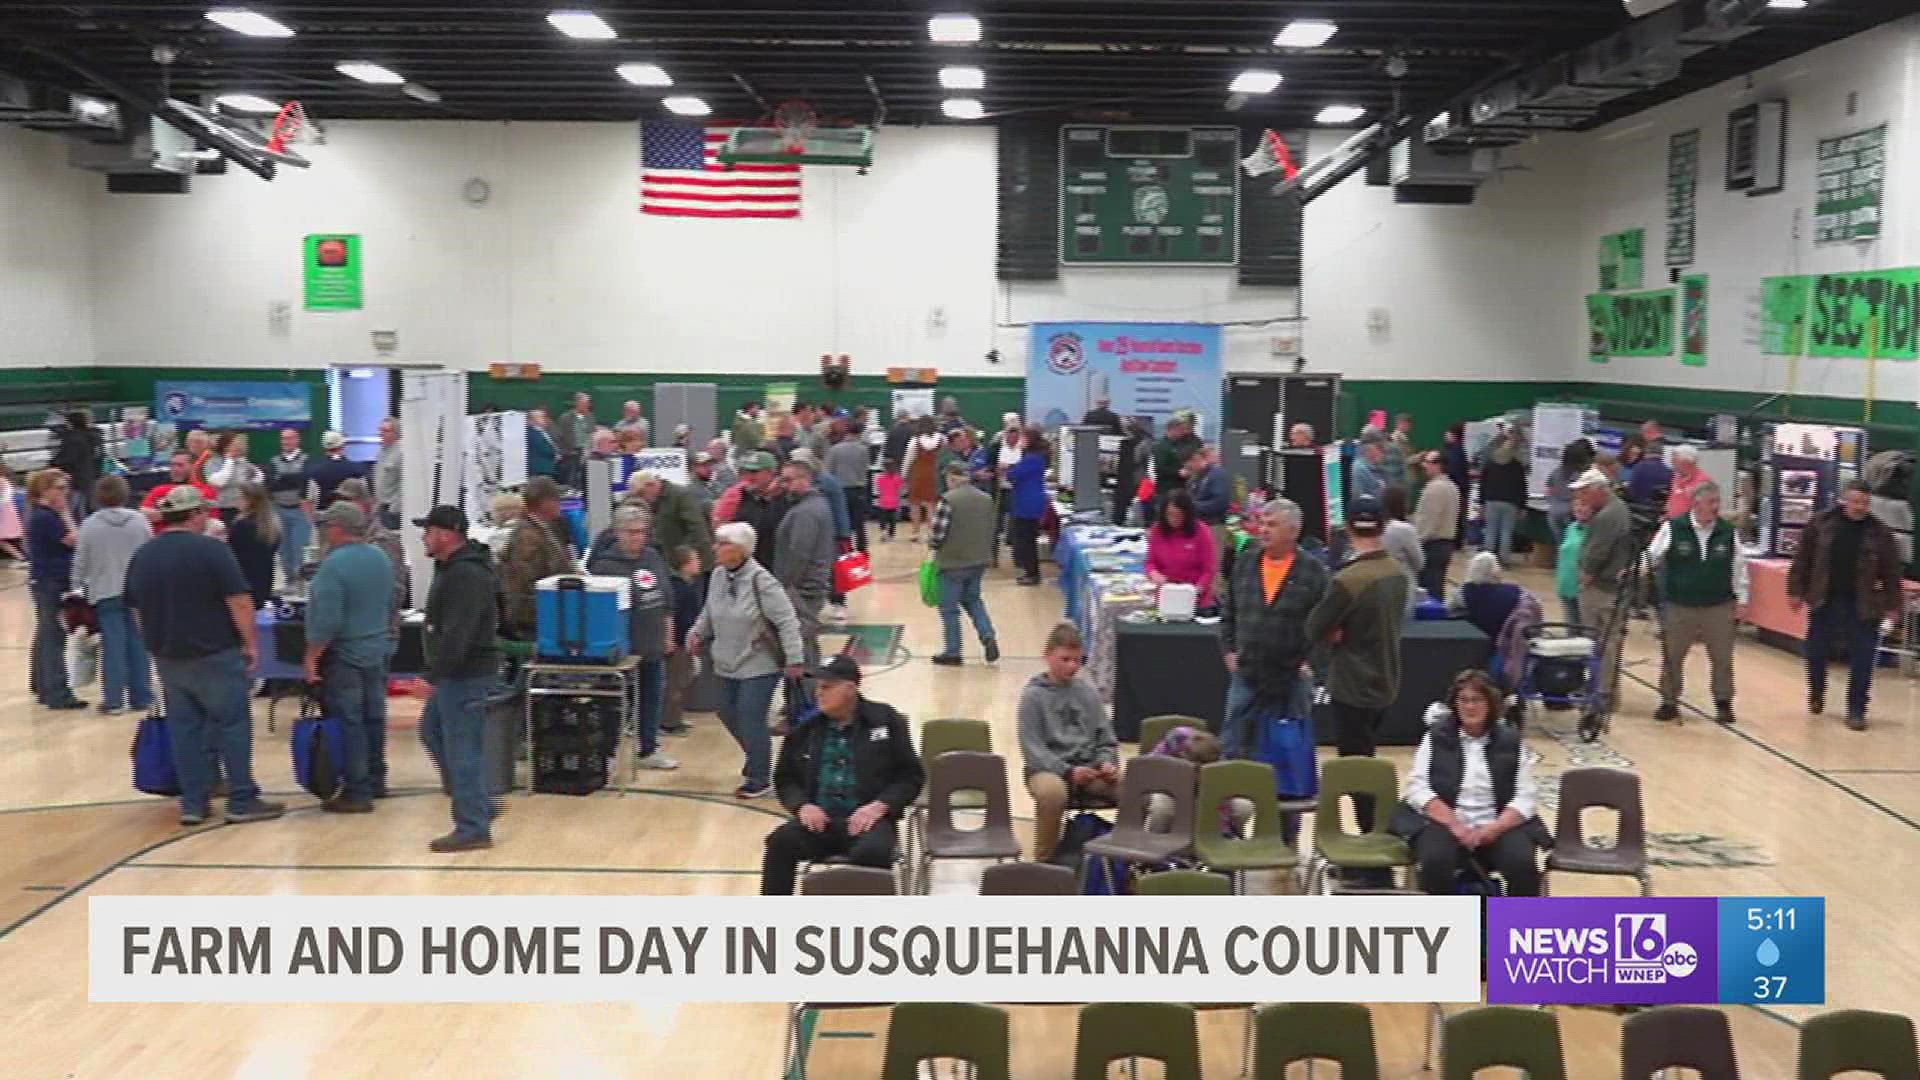 Susquehanna County held its annual Farm and Home day to show how agriculture plays a big role in the community.